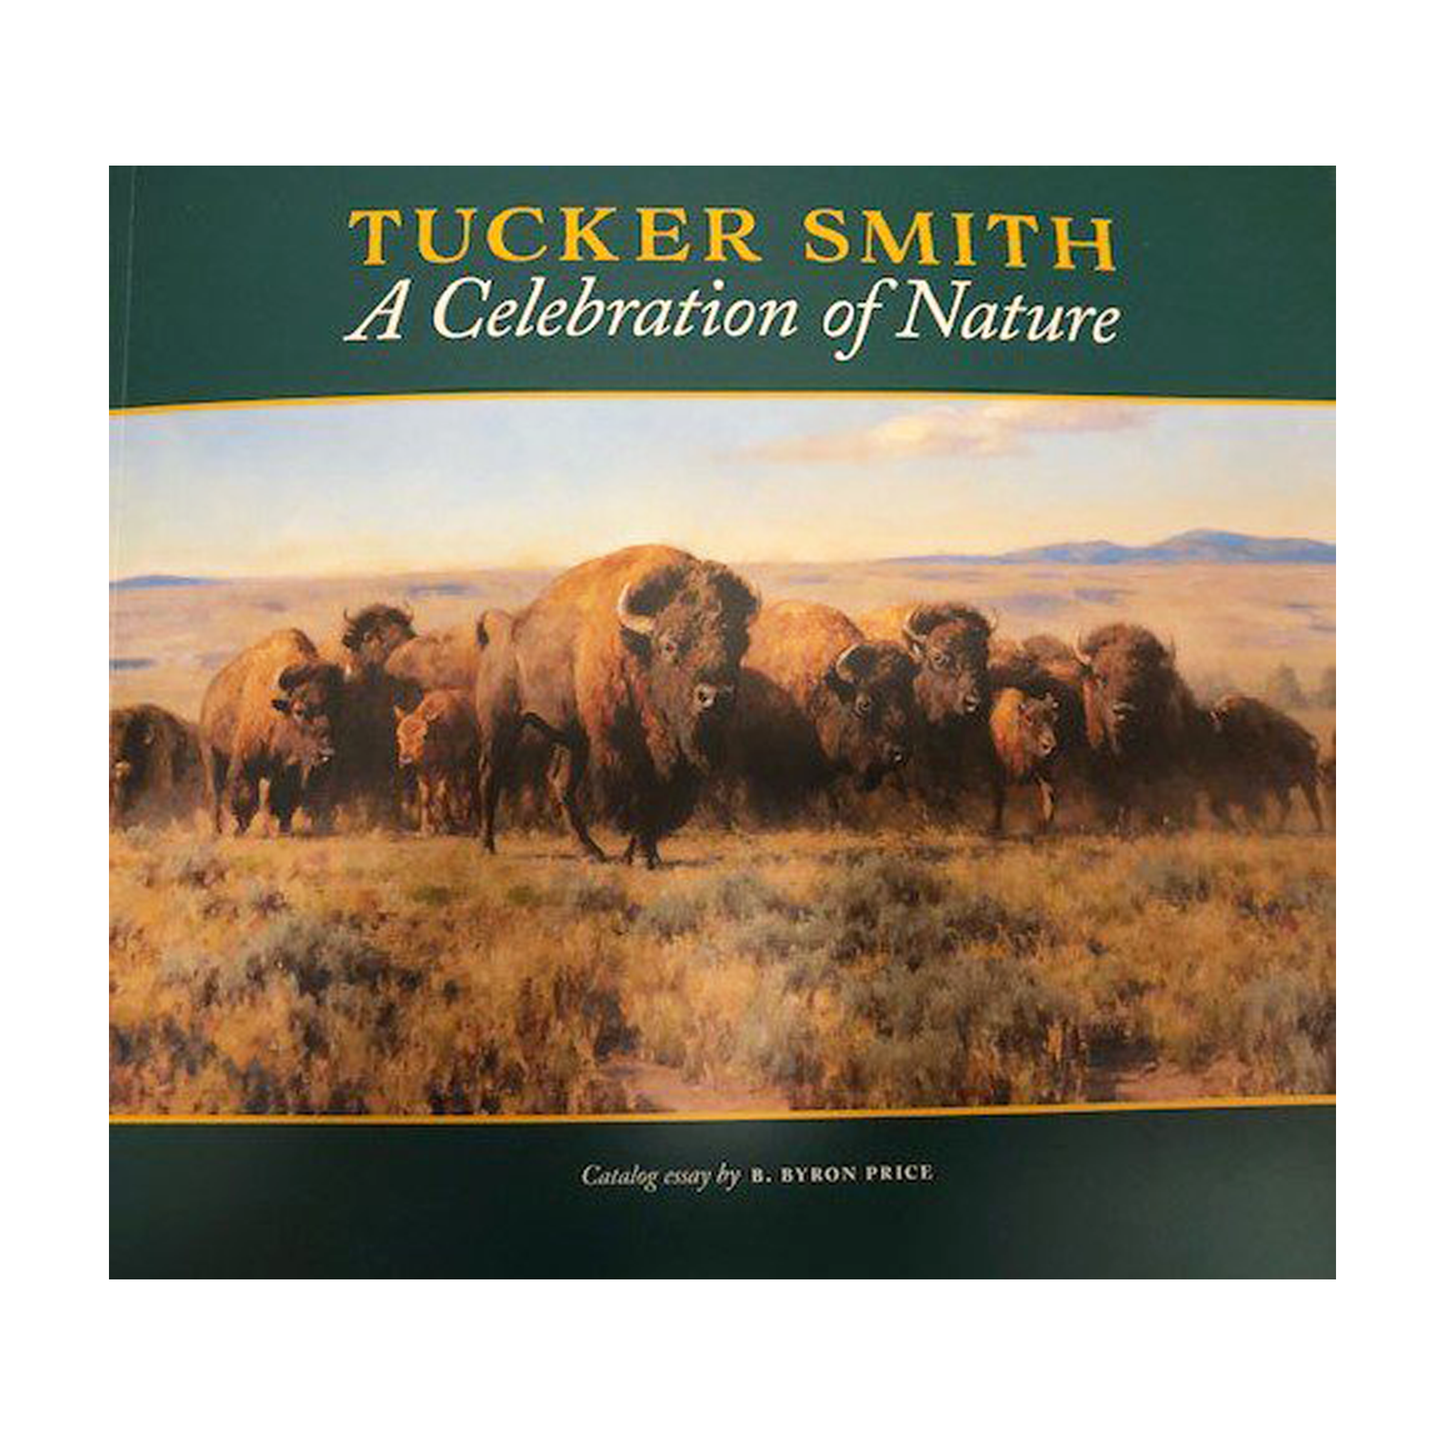 “A Celebration of Nature” by Tucker Smith. Catalog Essay by B. Byron Price.